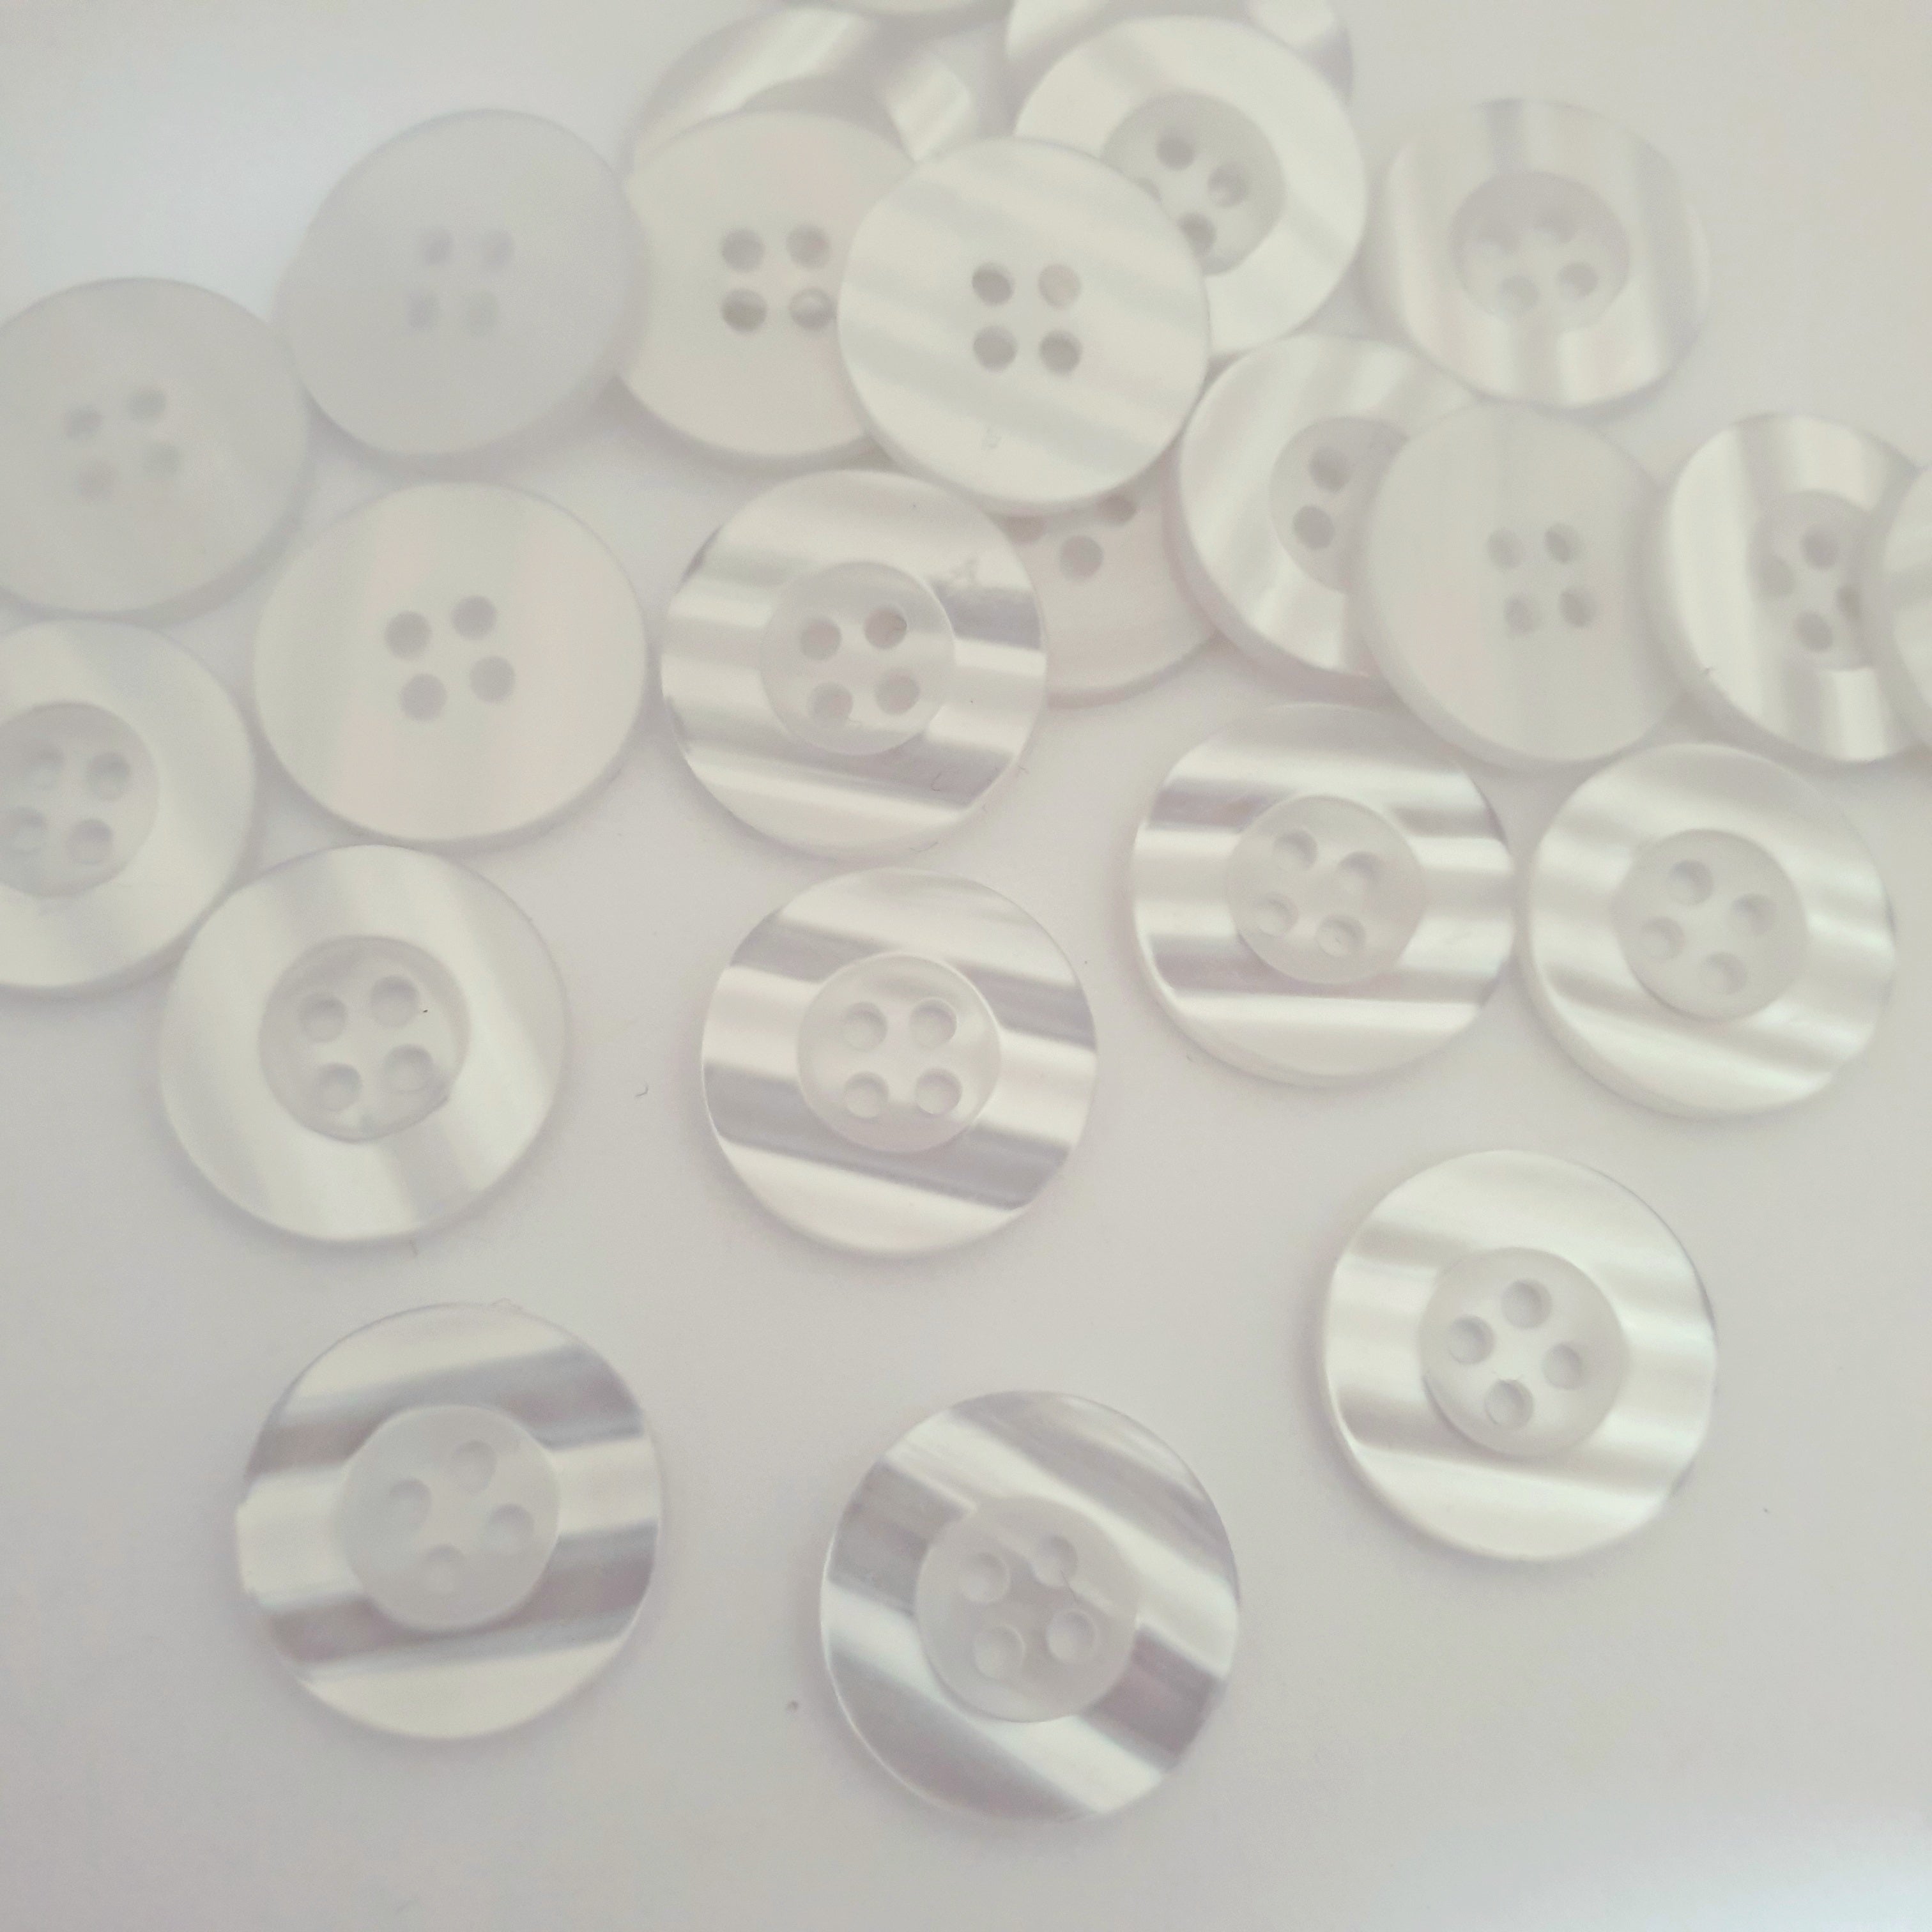 MajorCrafts 30pcs 20mm Clear White Pearlescent 4 Holes Round Resin Sewing Buttons